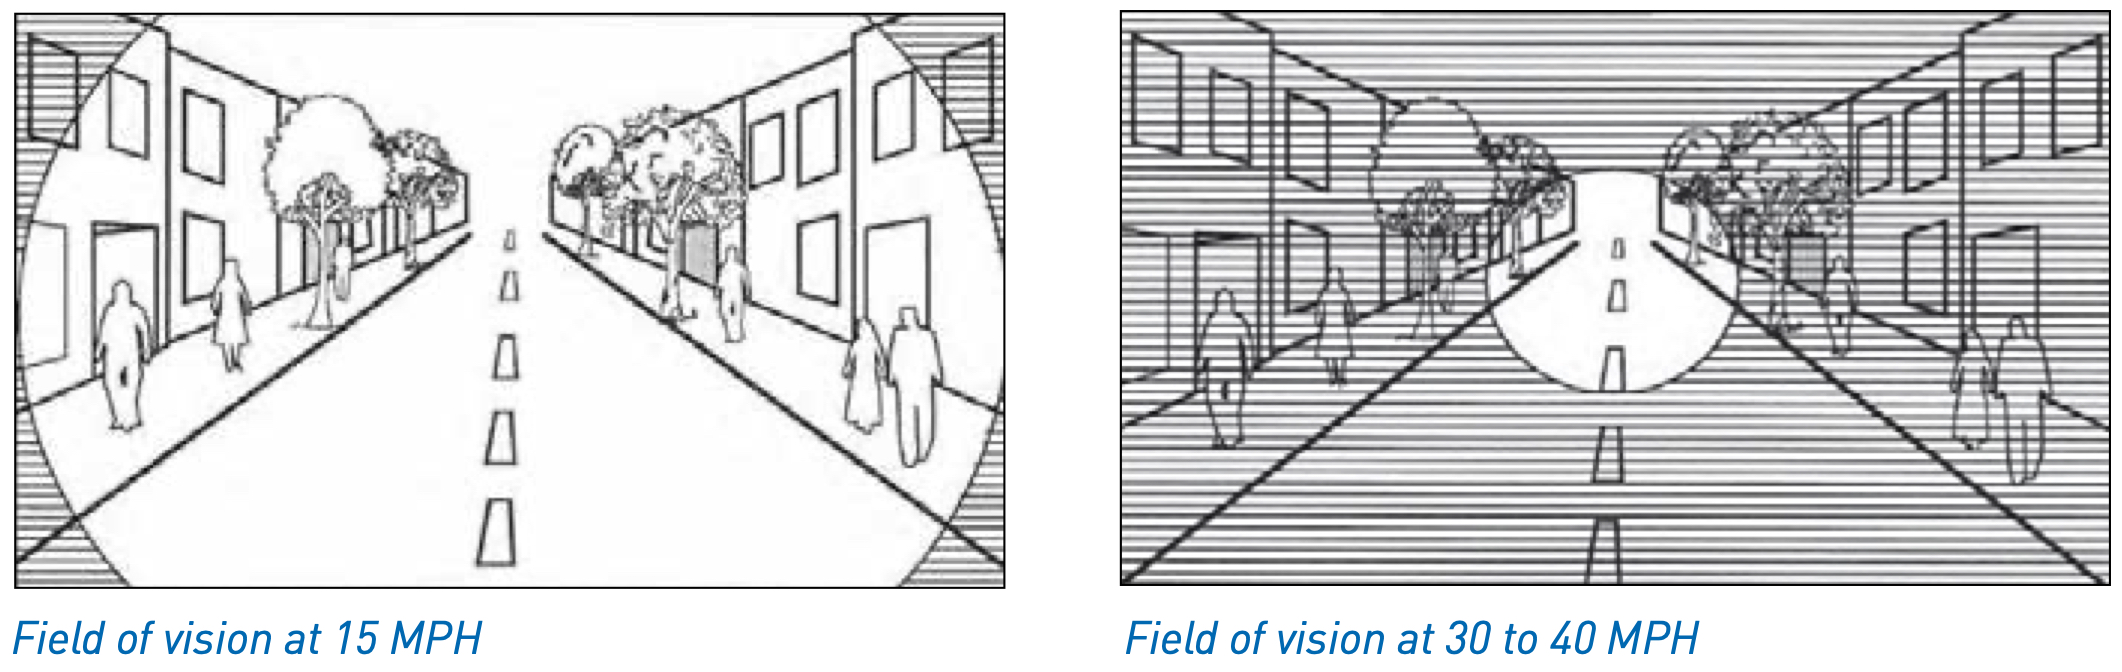 Comparison of a driver's field of vision at 15 mph and at 30 mph. The 15mph driver can see the road as well as pedestrians off to the sides, the 30 to 40 mph driver can only see a narrow portion of the road.